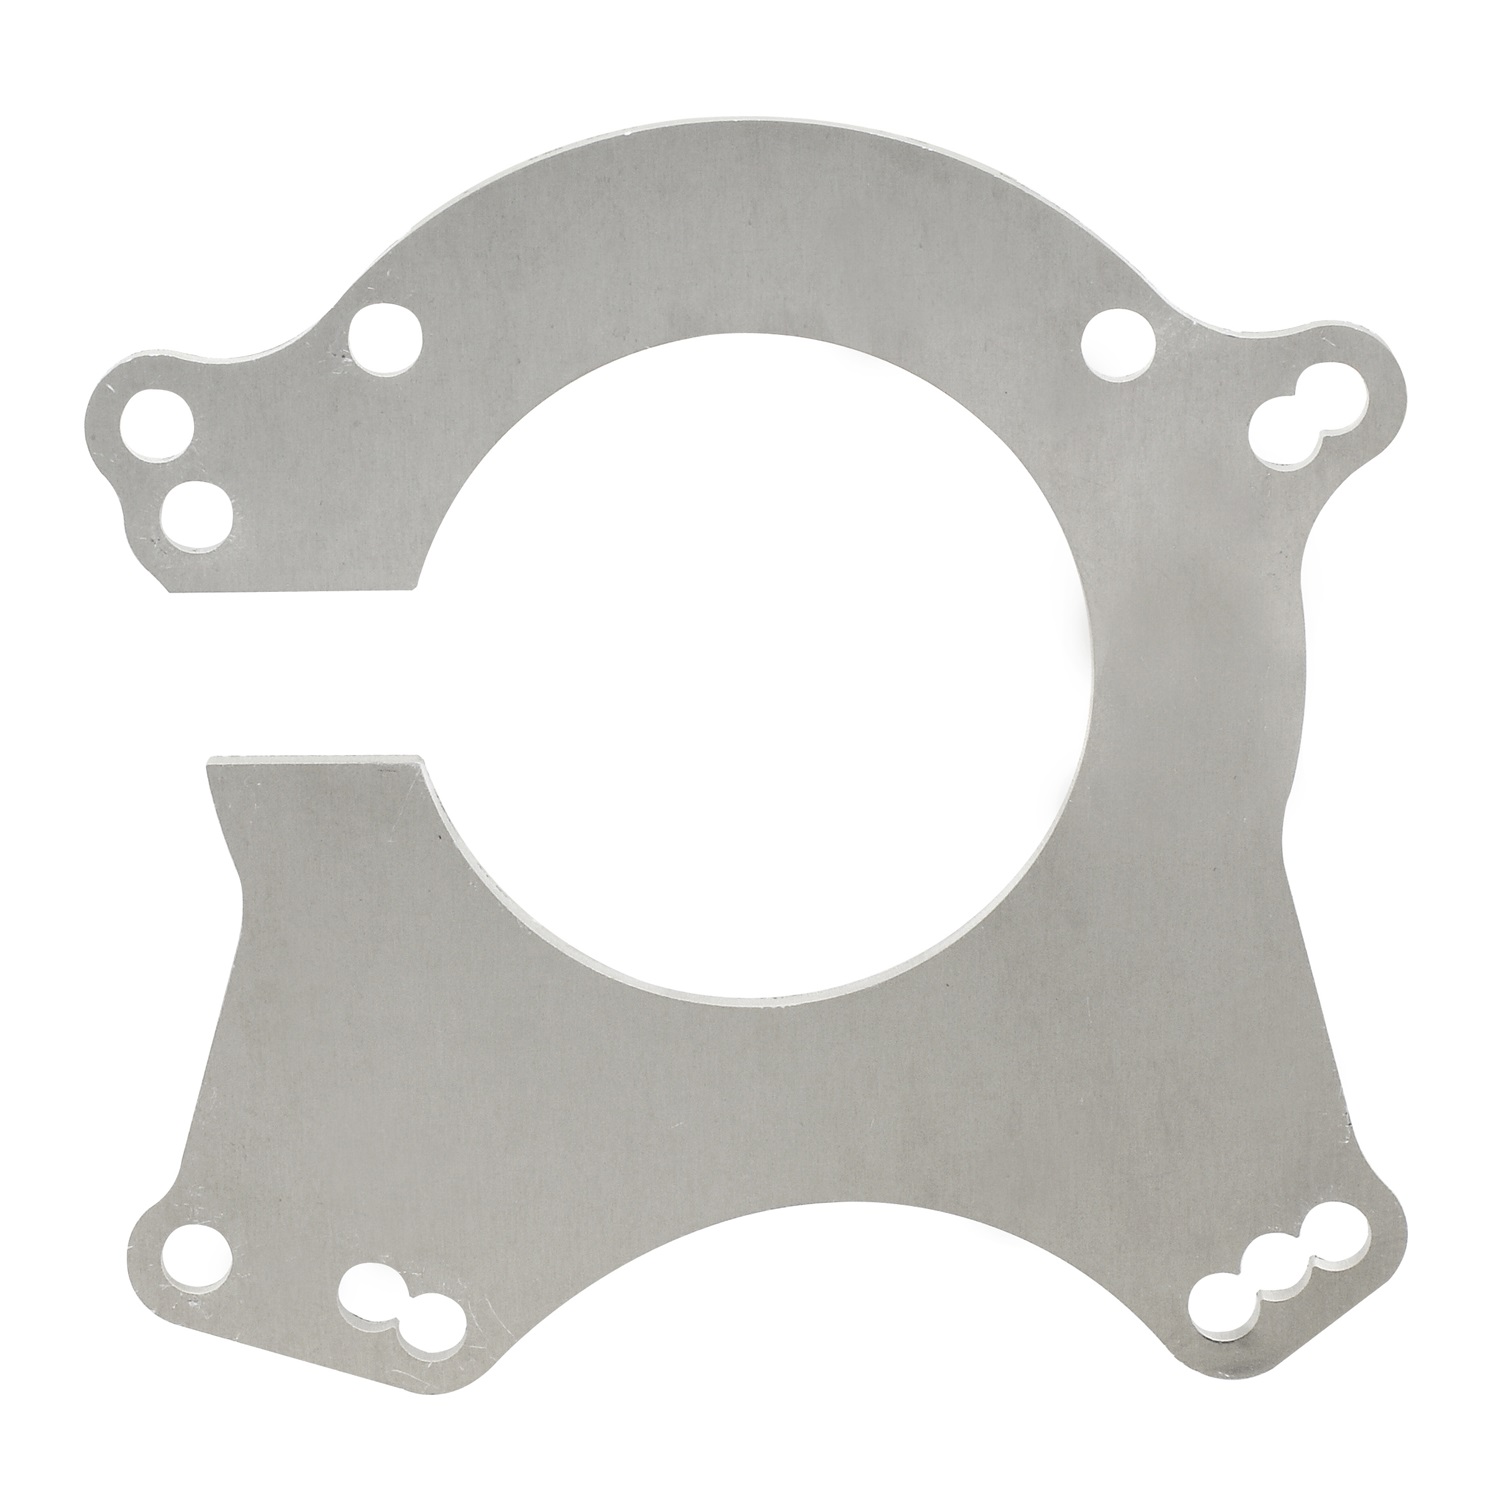 Lakewood Lakewood RM-201 Ford Spacer Plate